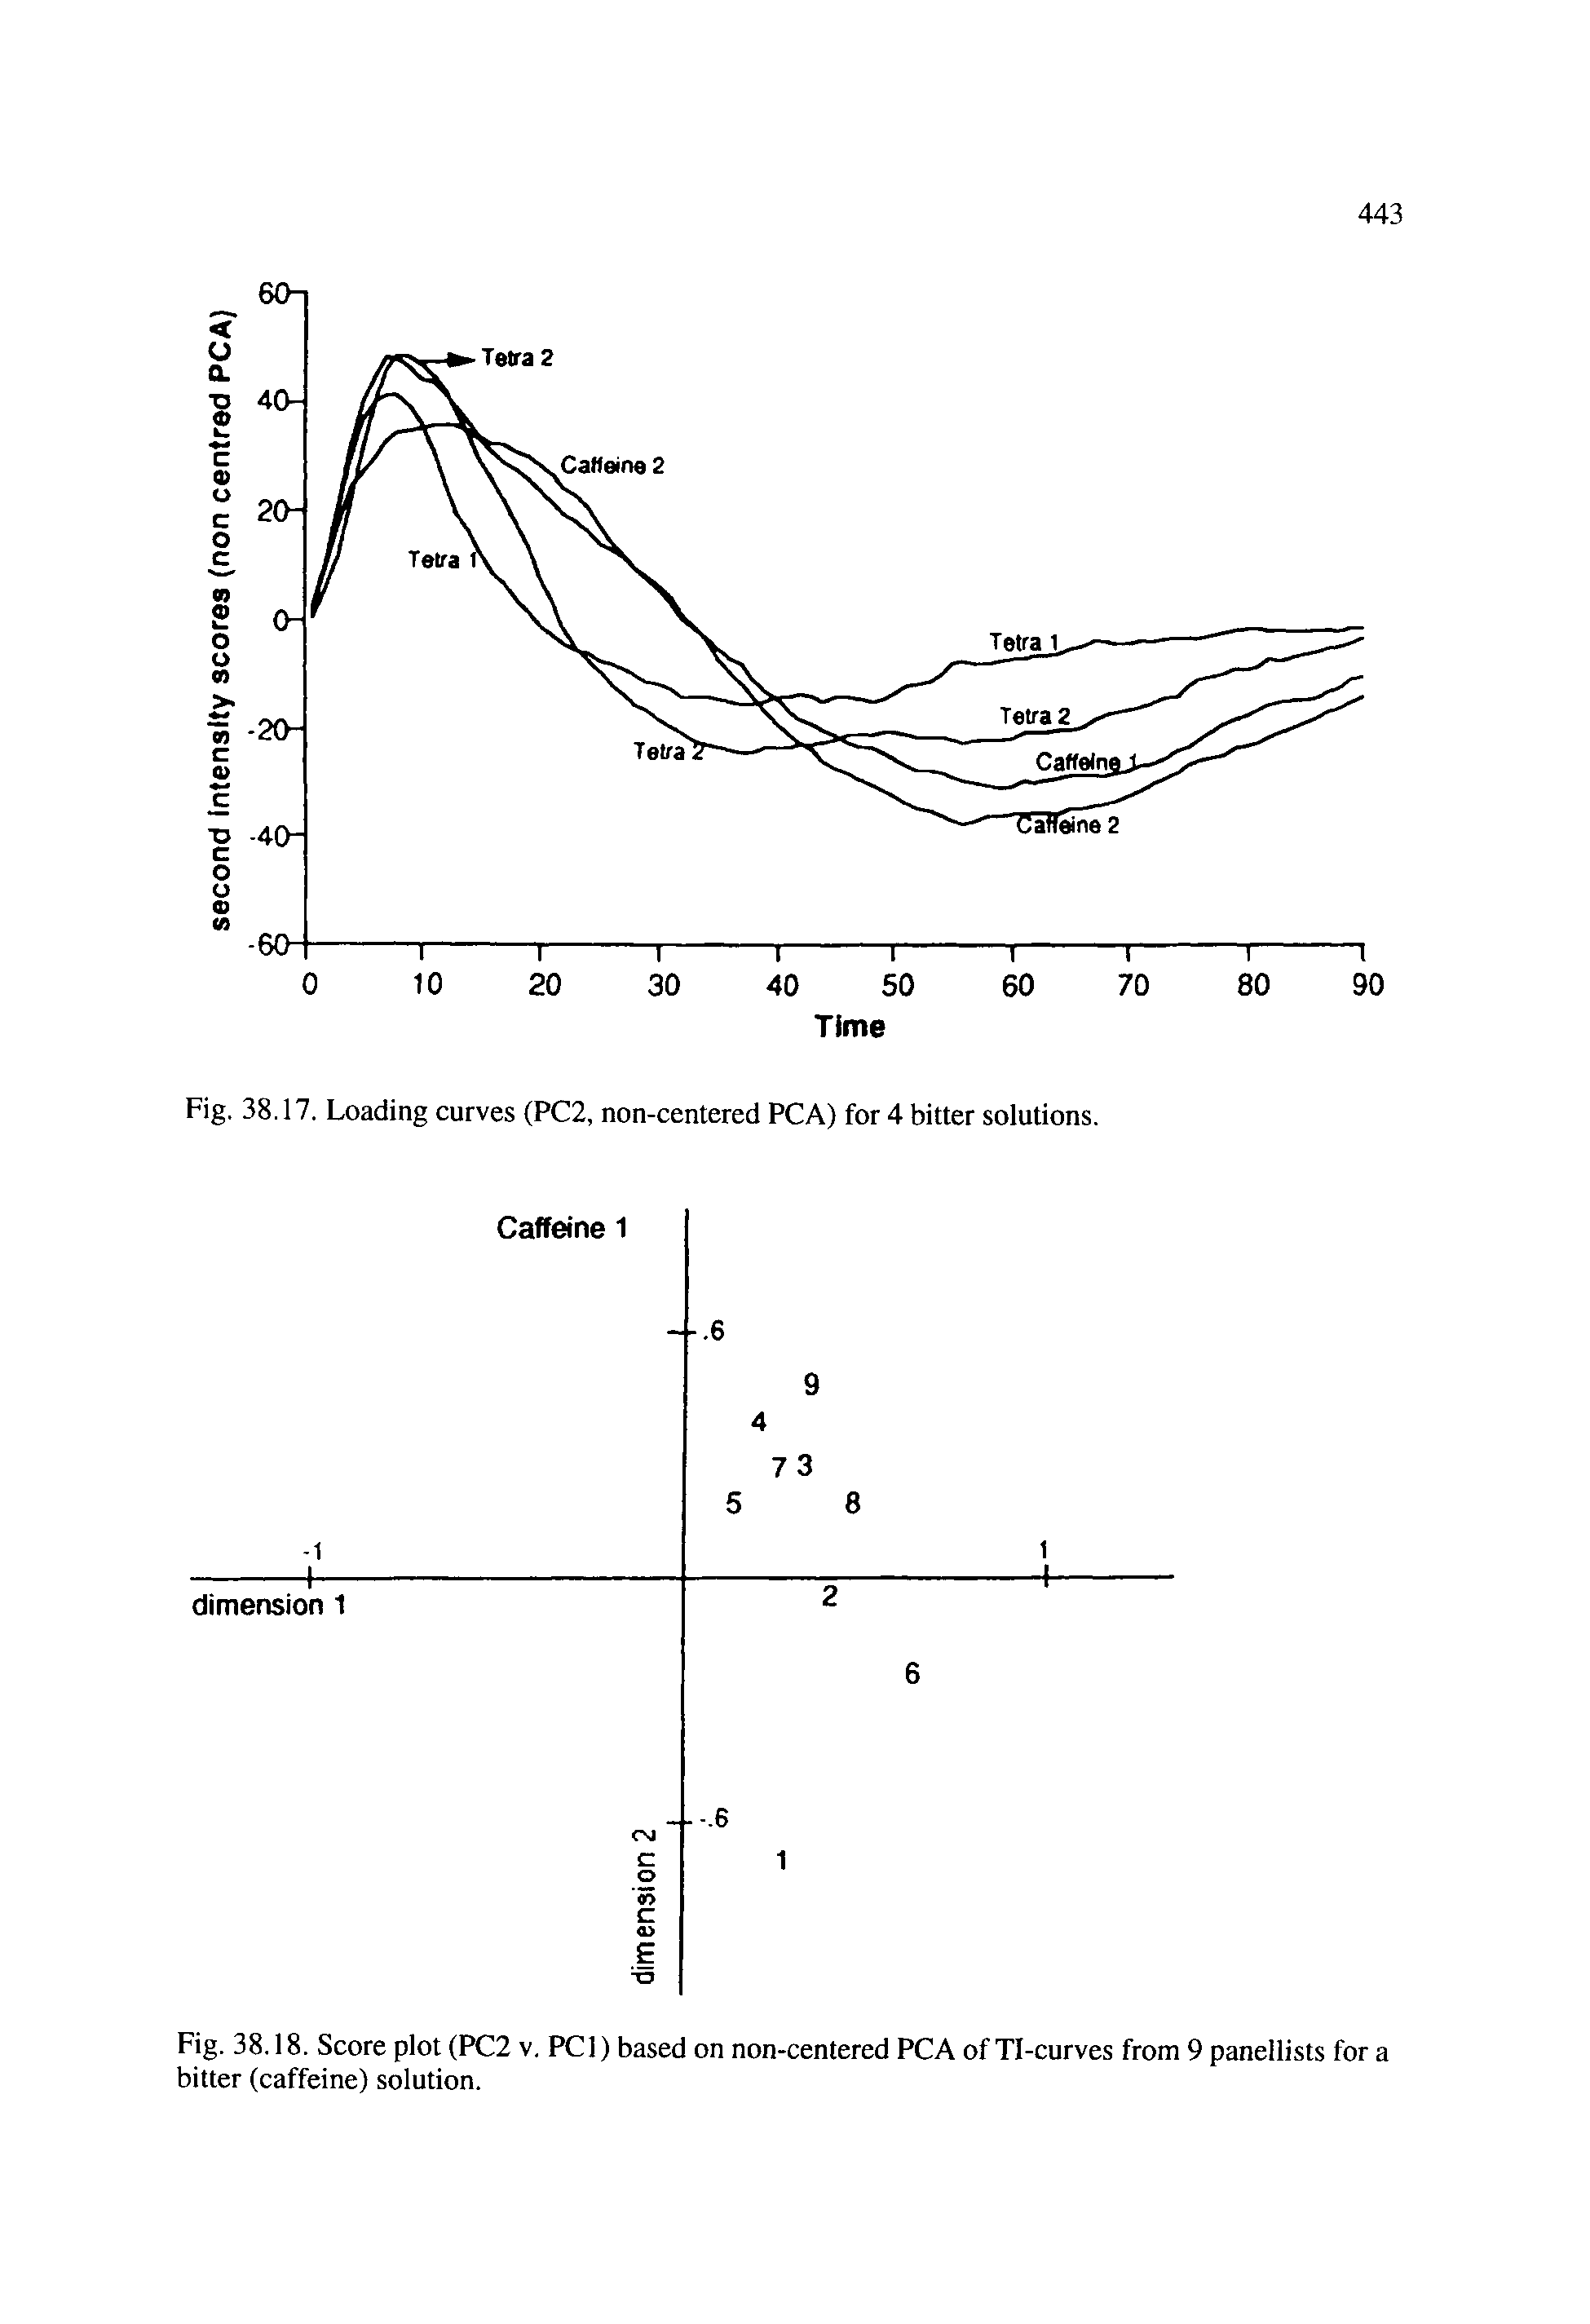 Fig. 38.18. Score plot (PC2 v. PCI) based on non-centered PCA of Tl-curves from 9 panellists for a bitter (caffeine) solution.